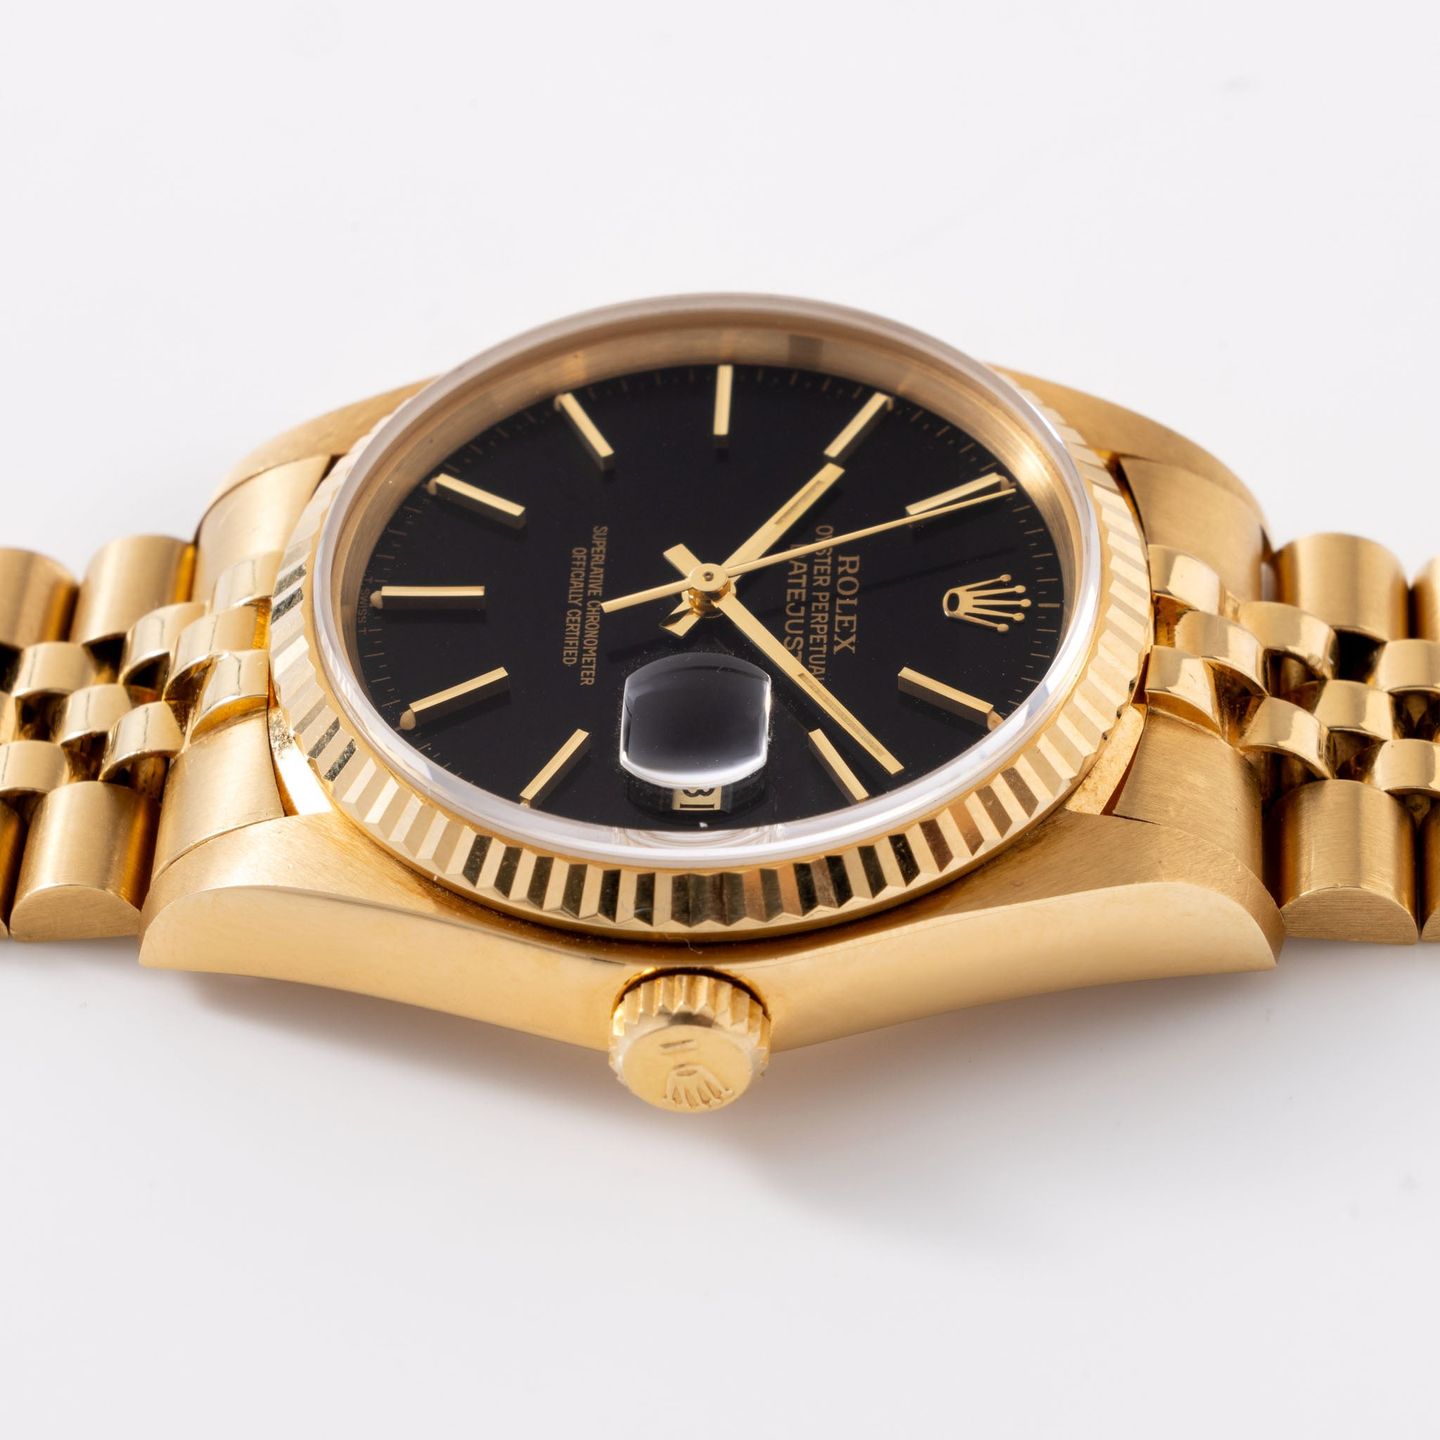 Rolex Datejust 36 16018 (1981) - Black dial 36 mm Yellow Gold case (8/8)